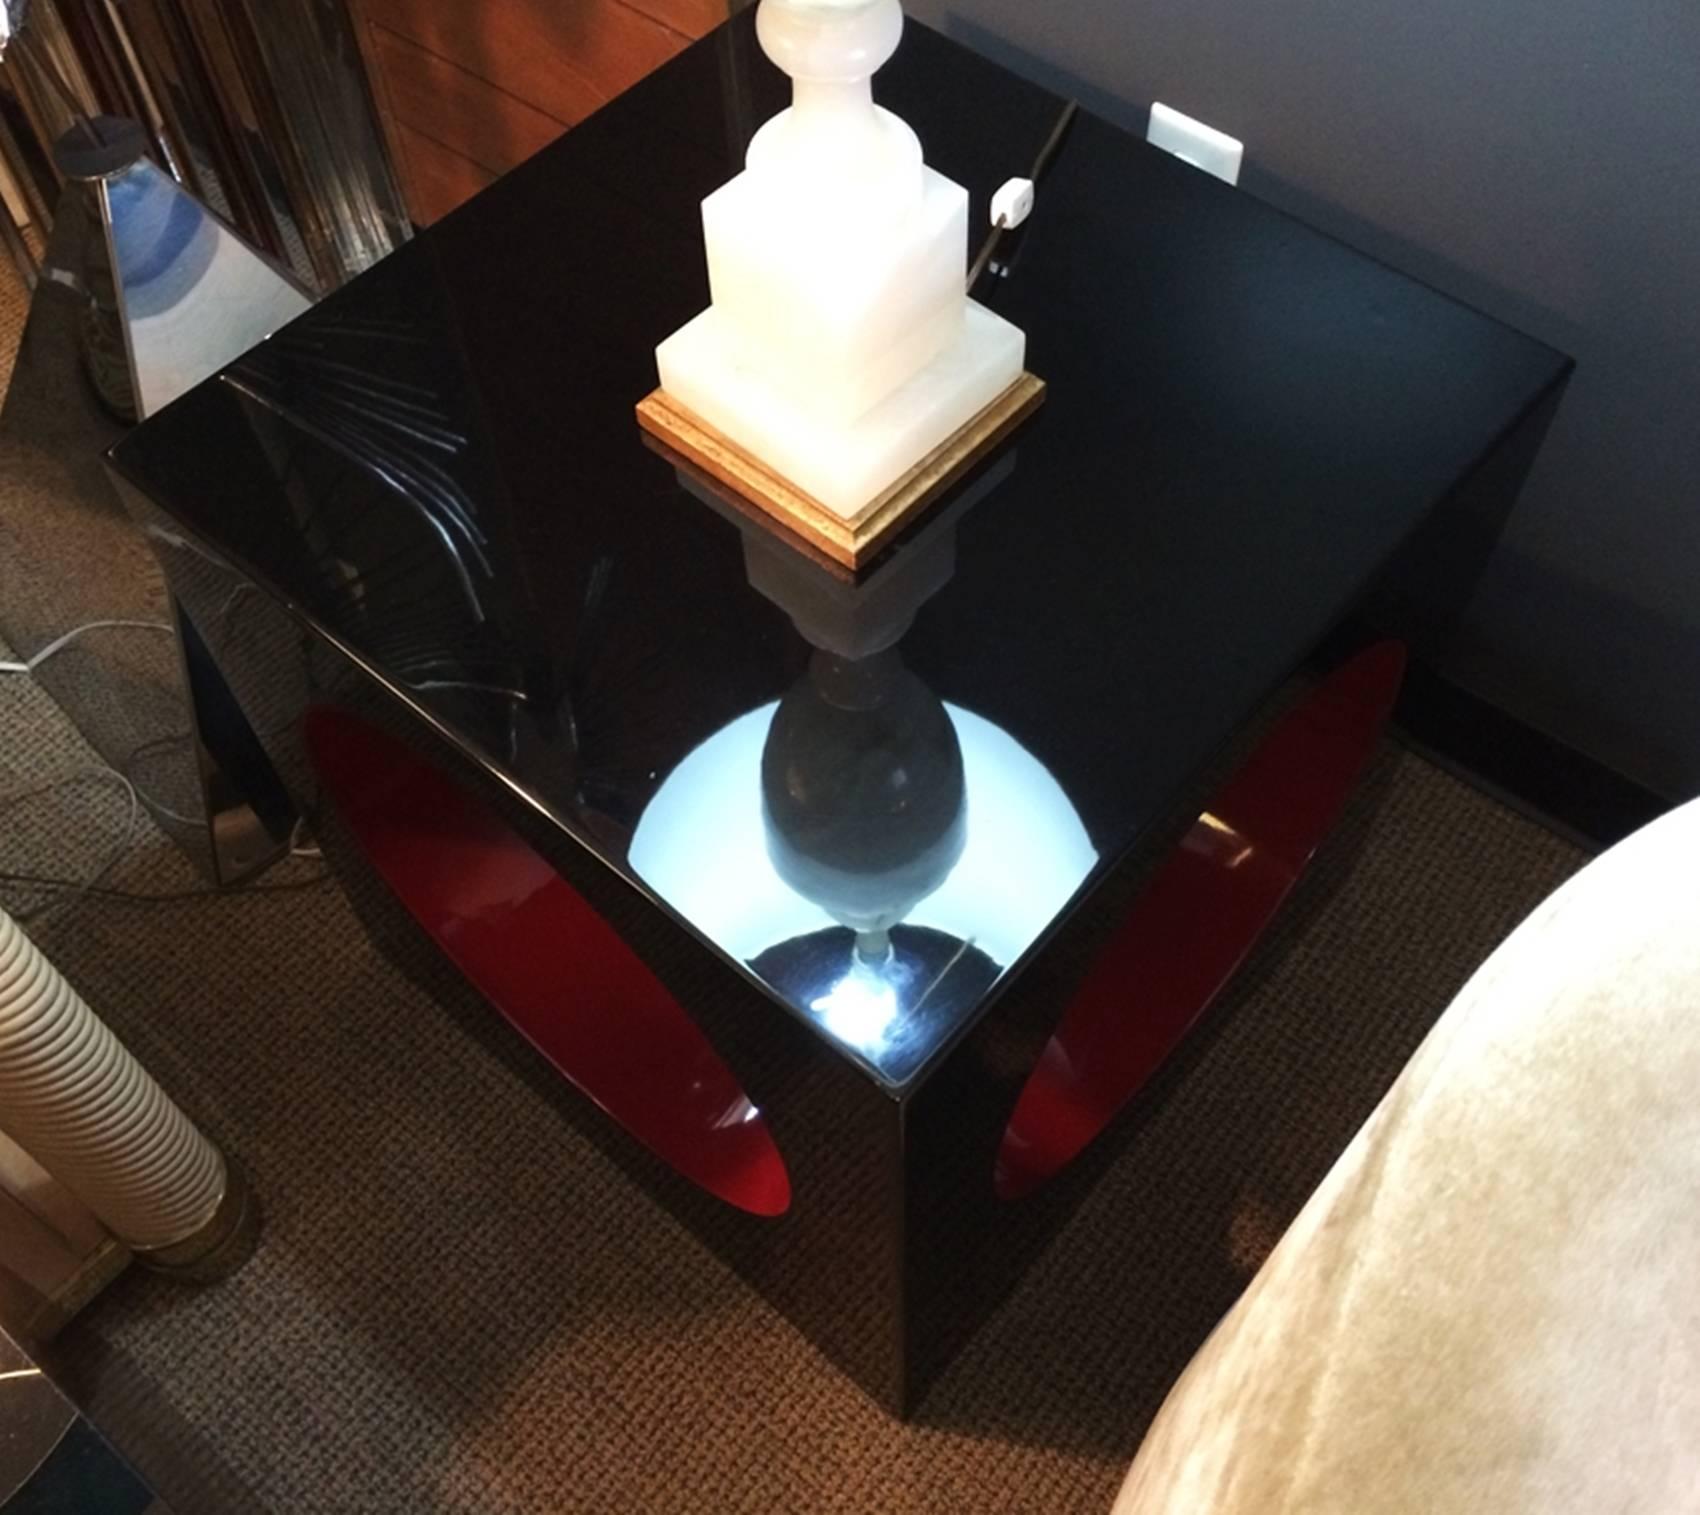 Stunning 1970s square table with a fantastic geometric design. This table is really eye-catching form any angle you see it, the black lacquered finish and the red center cutout complement each other real well. The piece is in excellent refinished